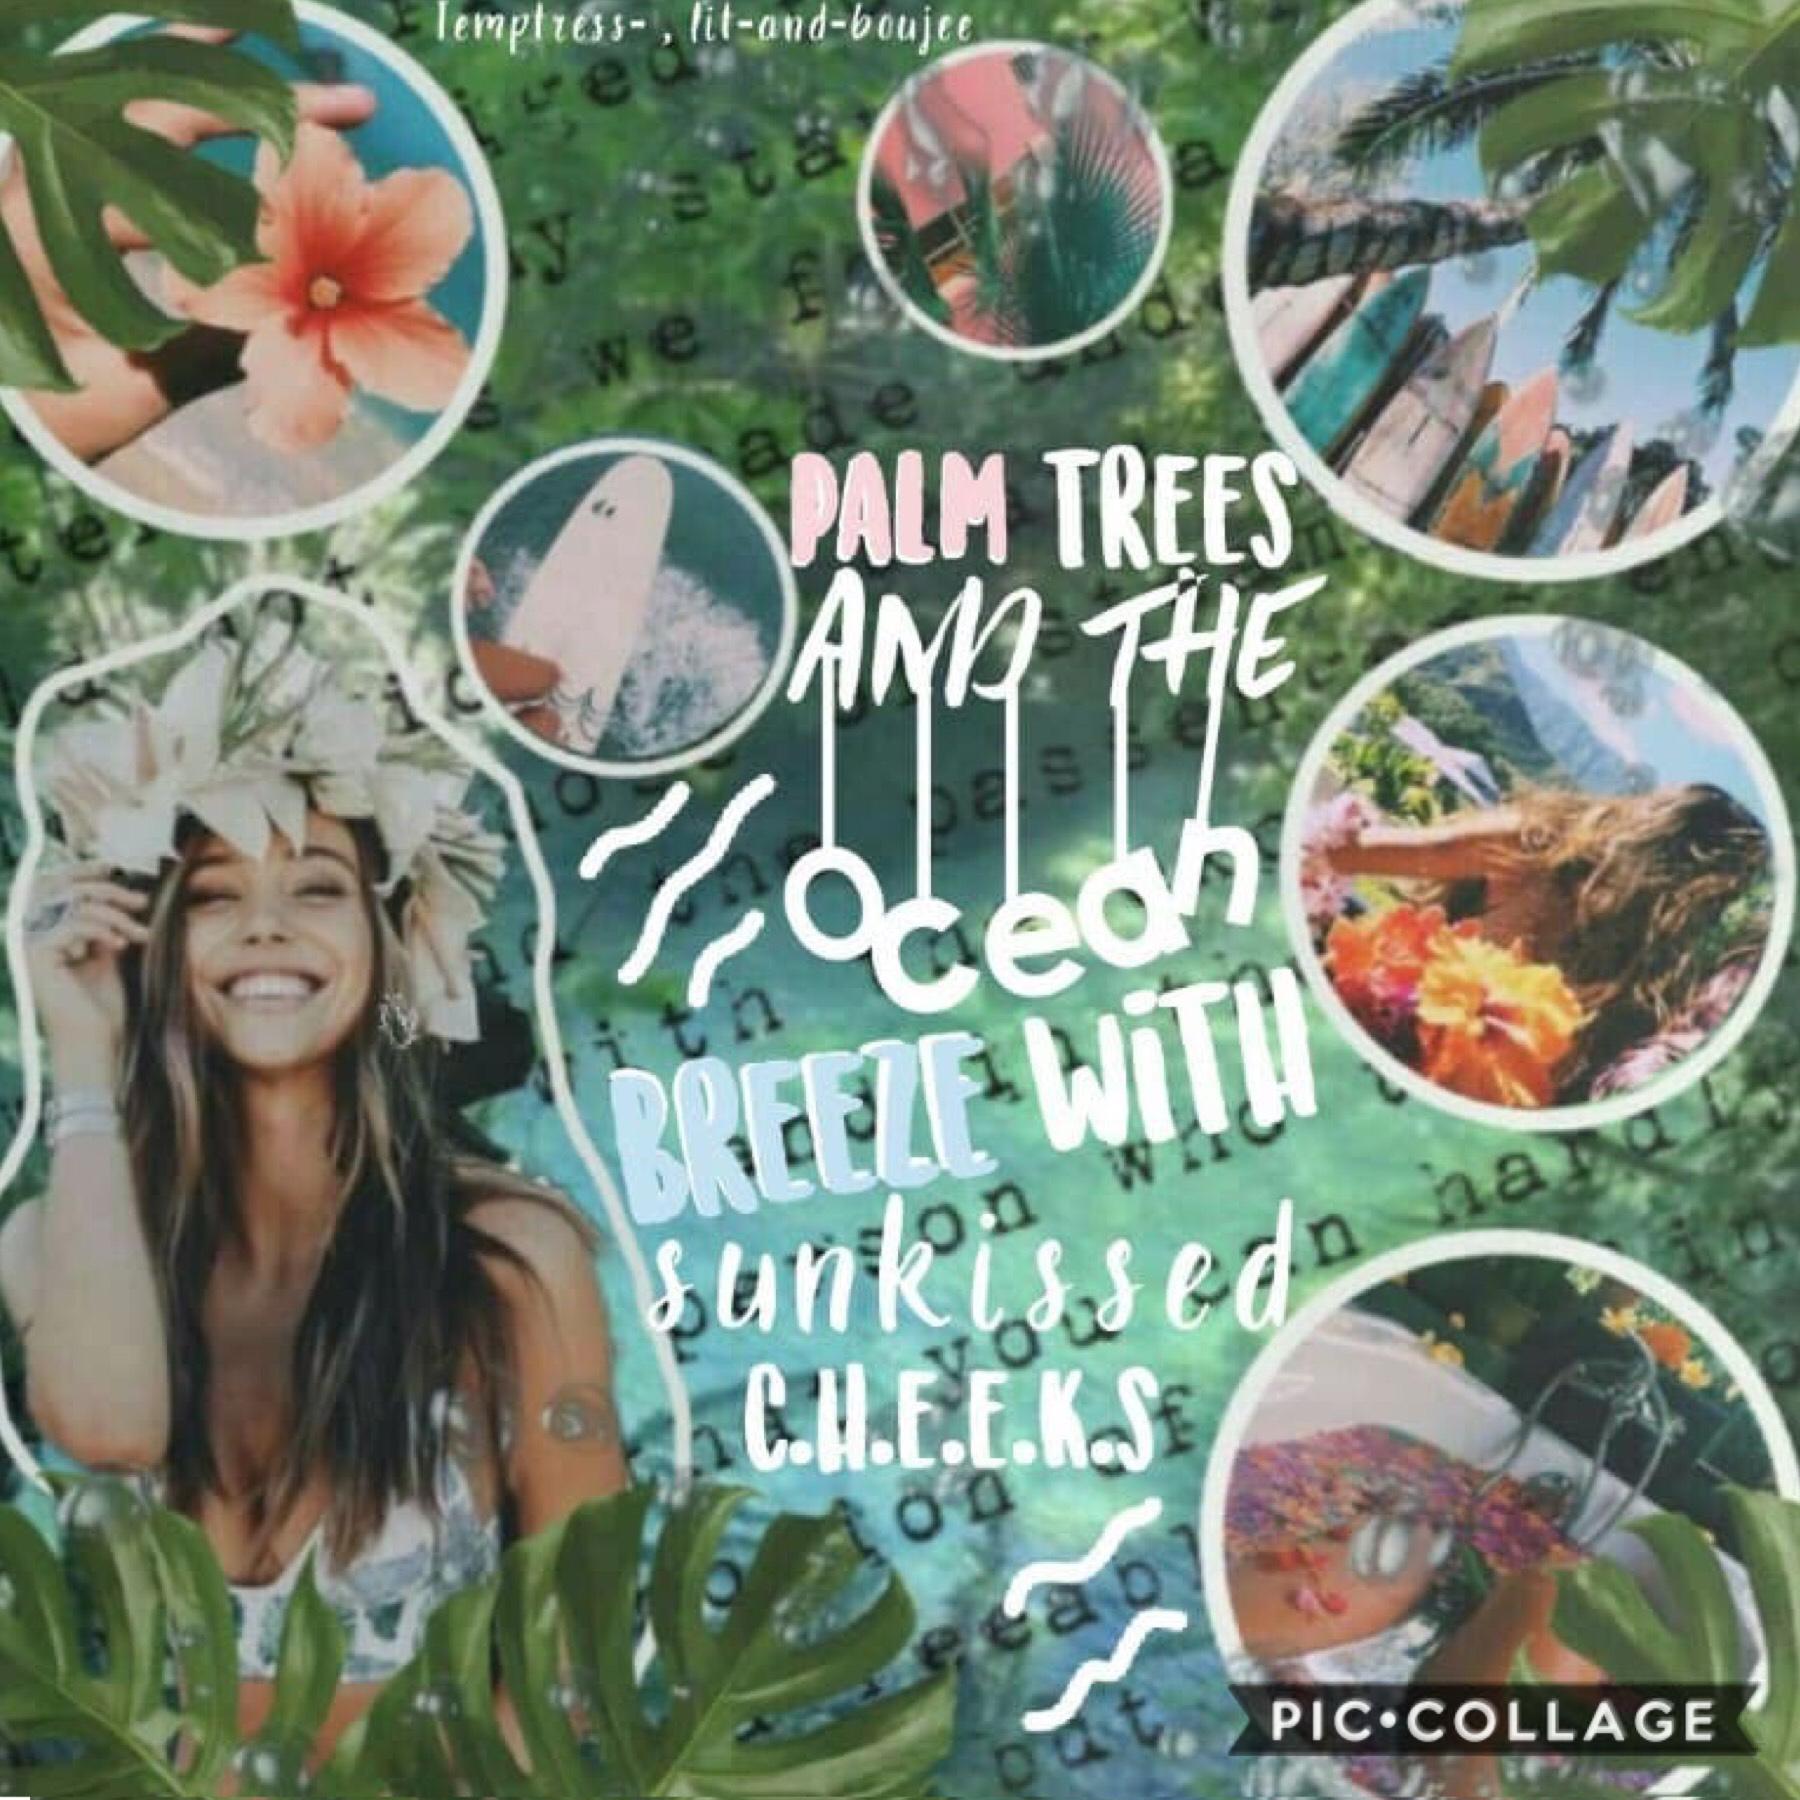 🌴💕Collab with Temptress- , she’s just amazing!😊Go follow her, her collages are beautiful!!!!!!Thanks for collabing with me! ILY!❤️